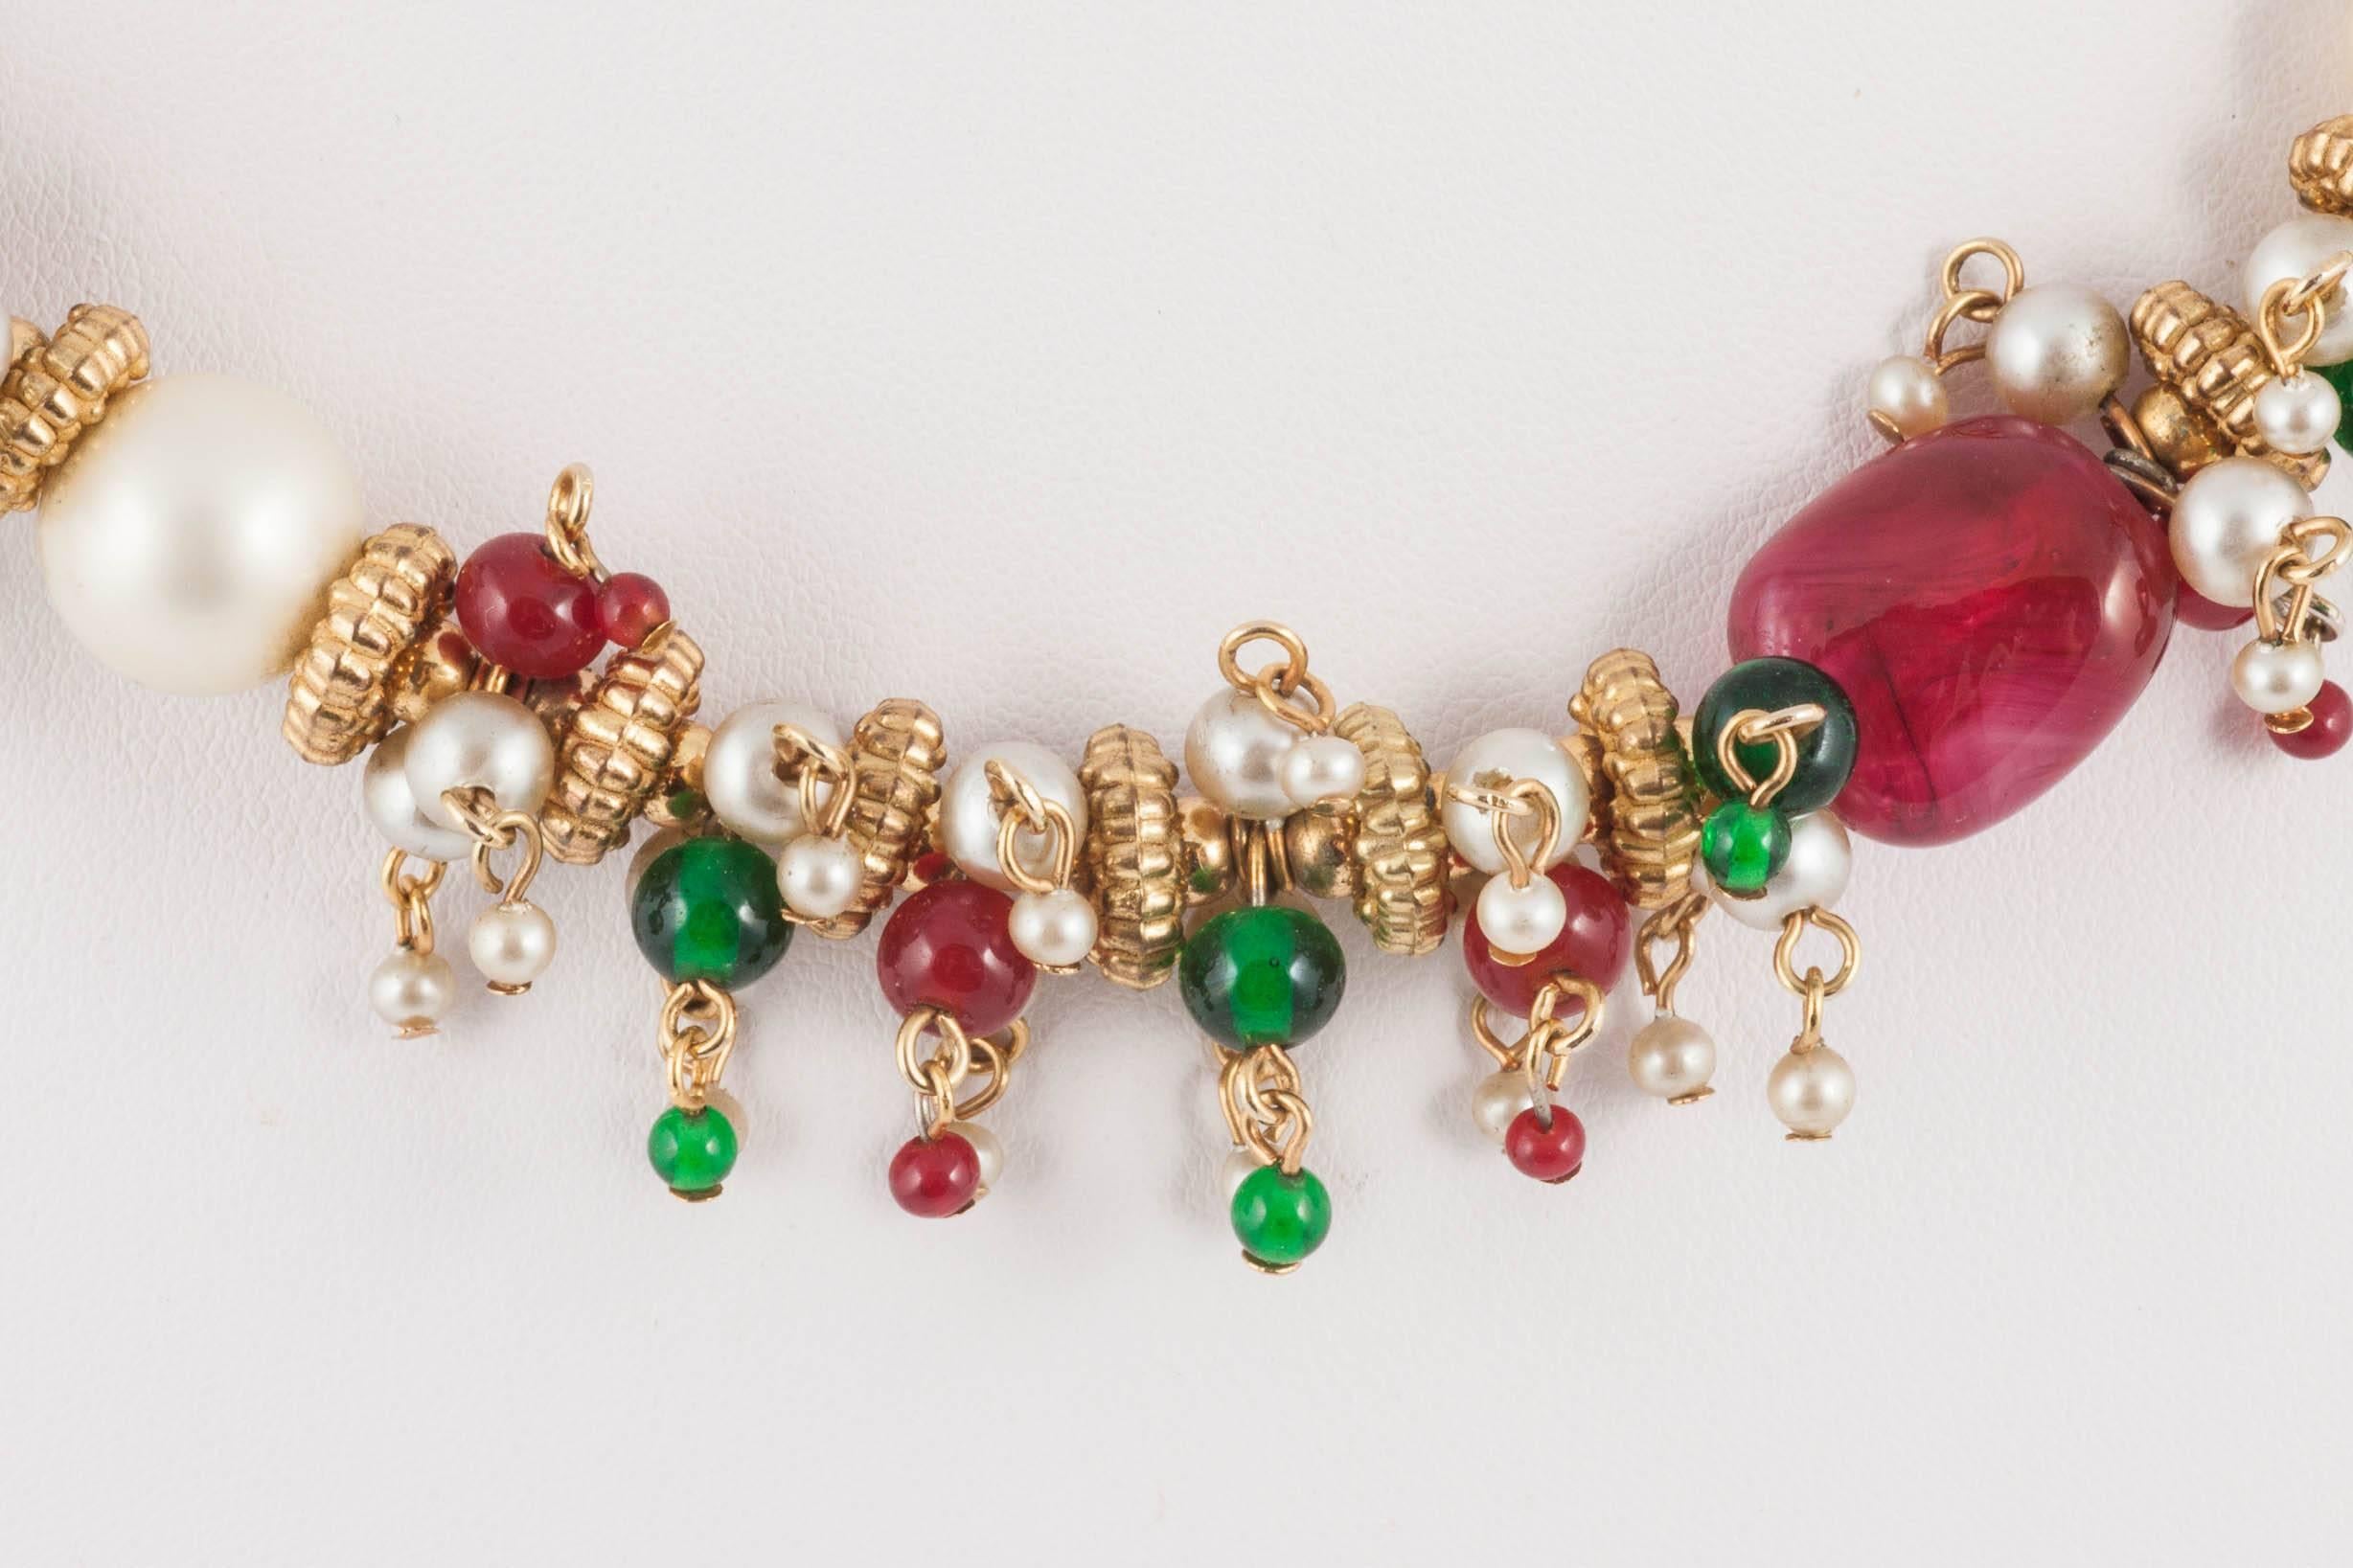 A short but sumptuous necklace , made from poured glass larger rubies and emeralds, with small rubies,emeralds and pearls interspersed in between, with smaller glass beads dangling and highlghting.
Wearable and highly collectable, this beautiful